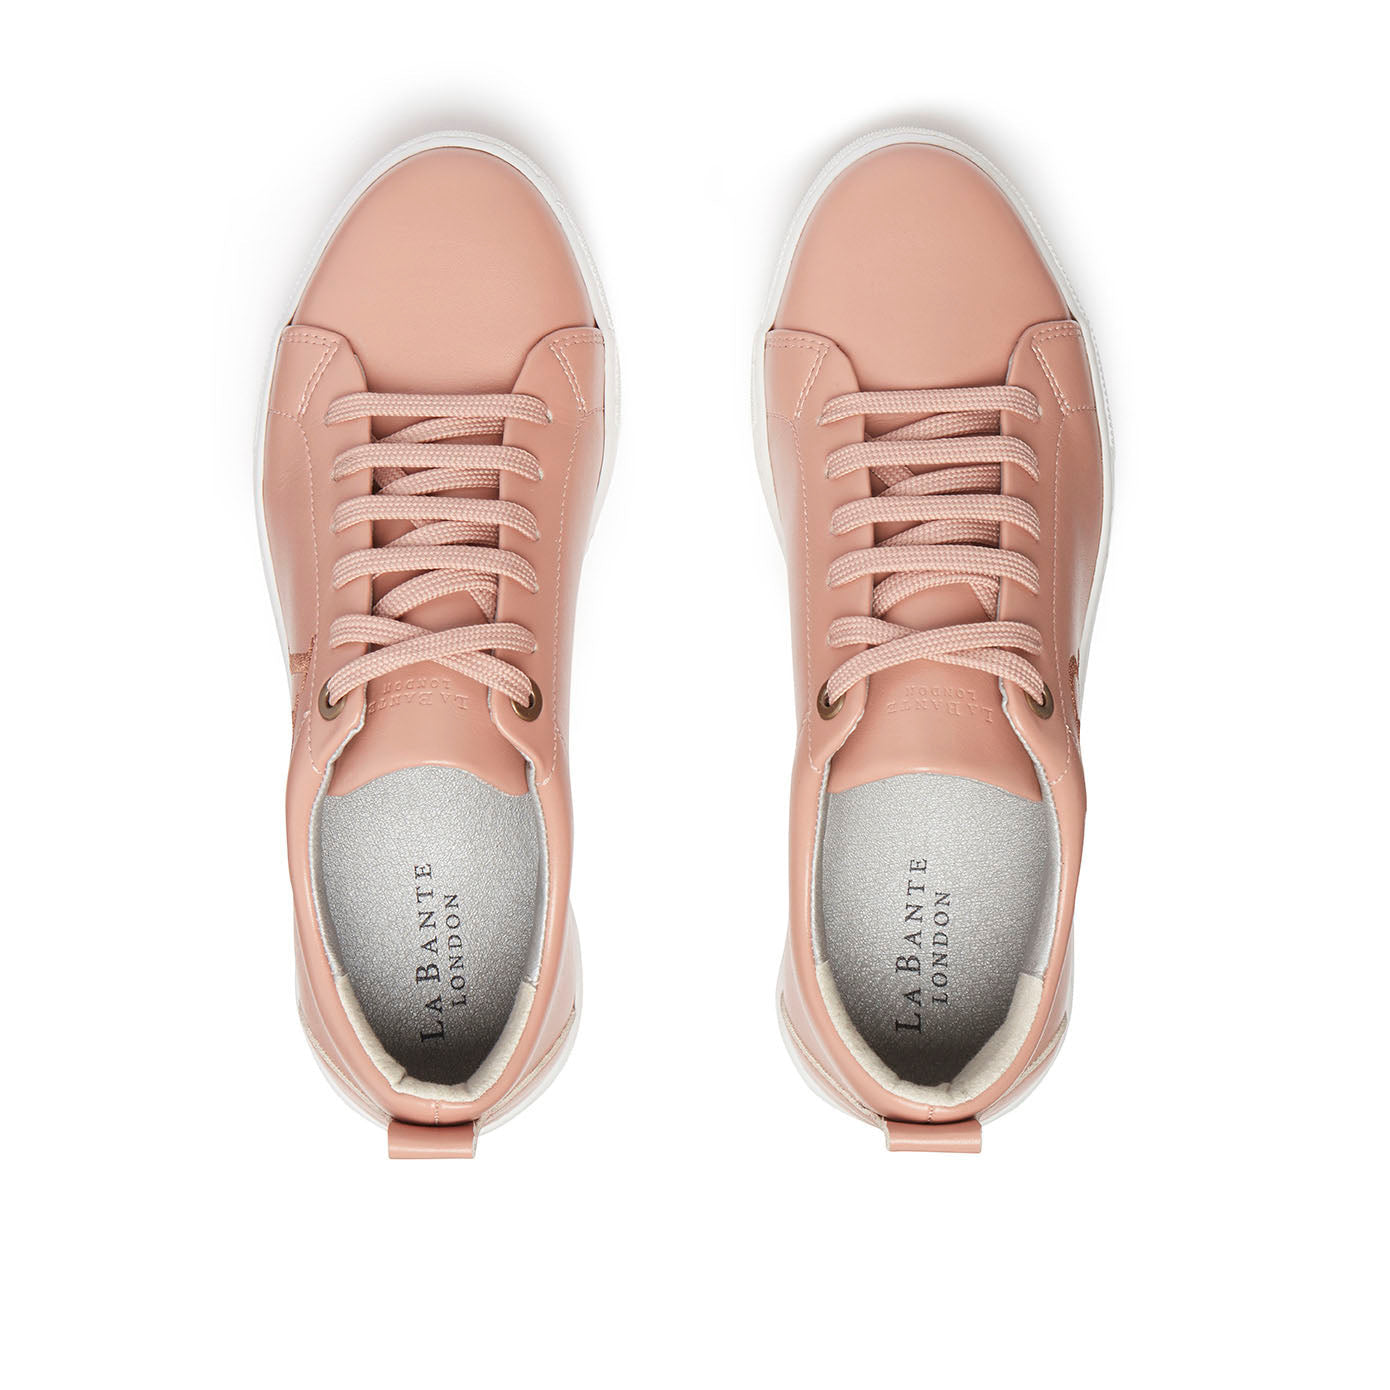 LB Nude Apple Leather Sneakers for Women - Scarvesnthangs